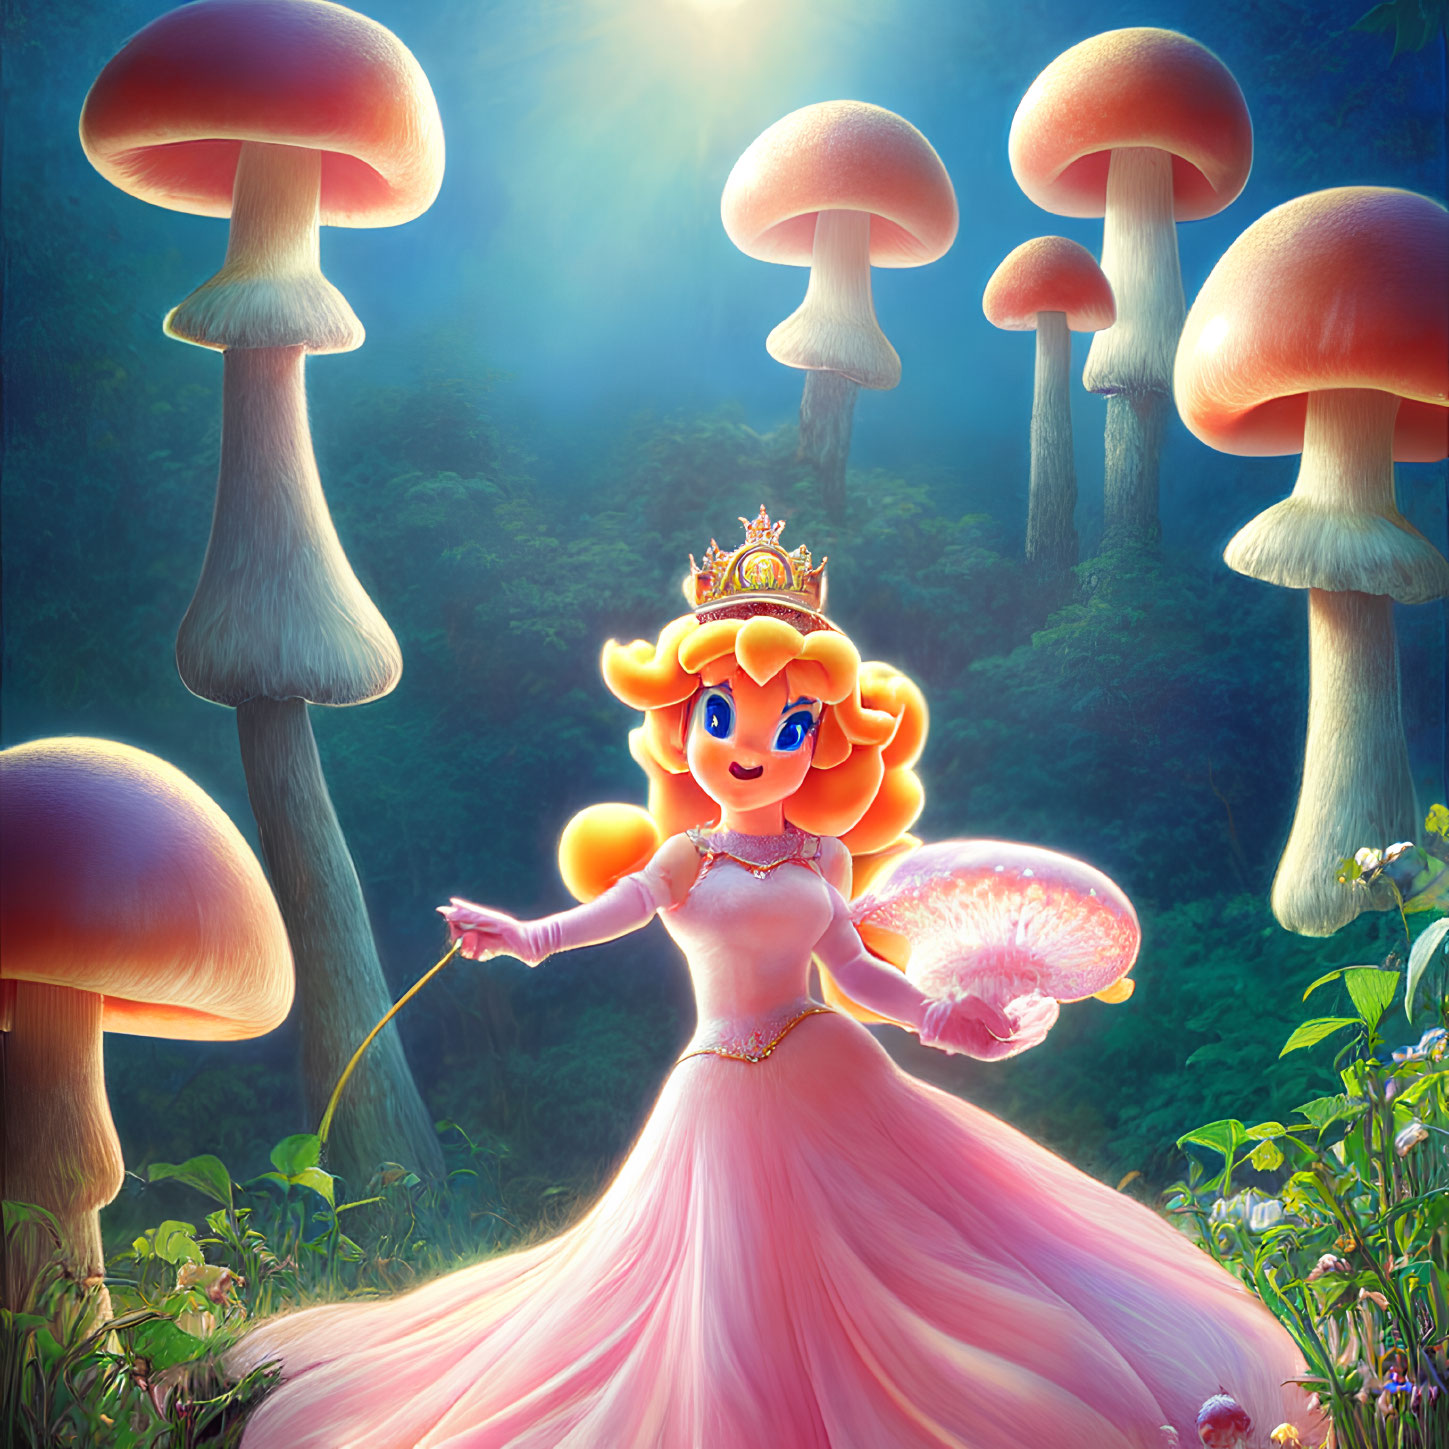 Princess in pink gown surrounded by luminescent mushrooms in enchanted forest